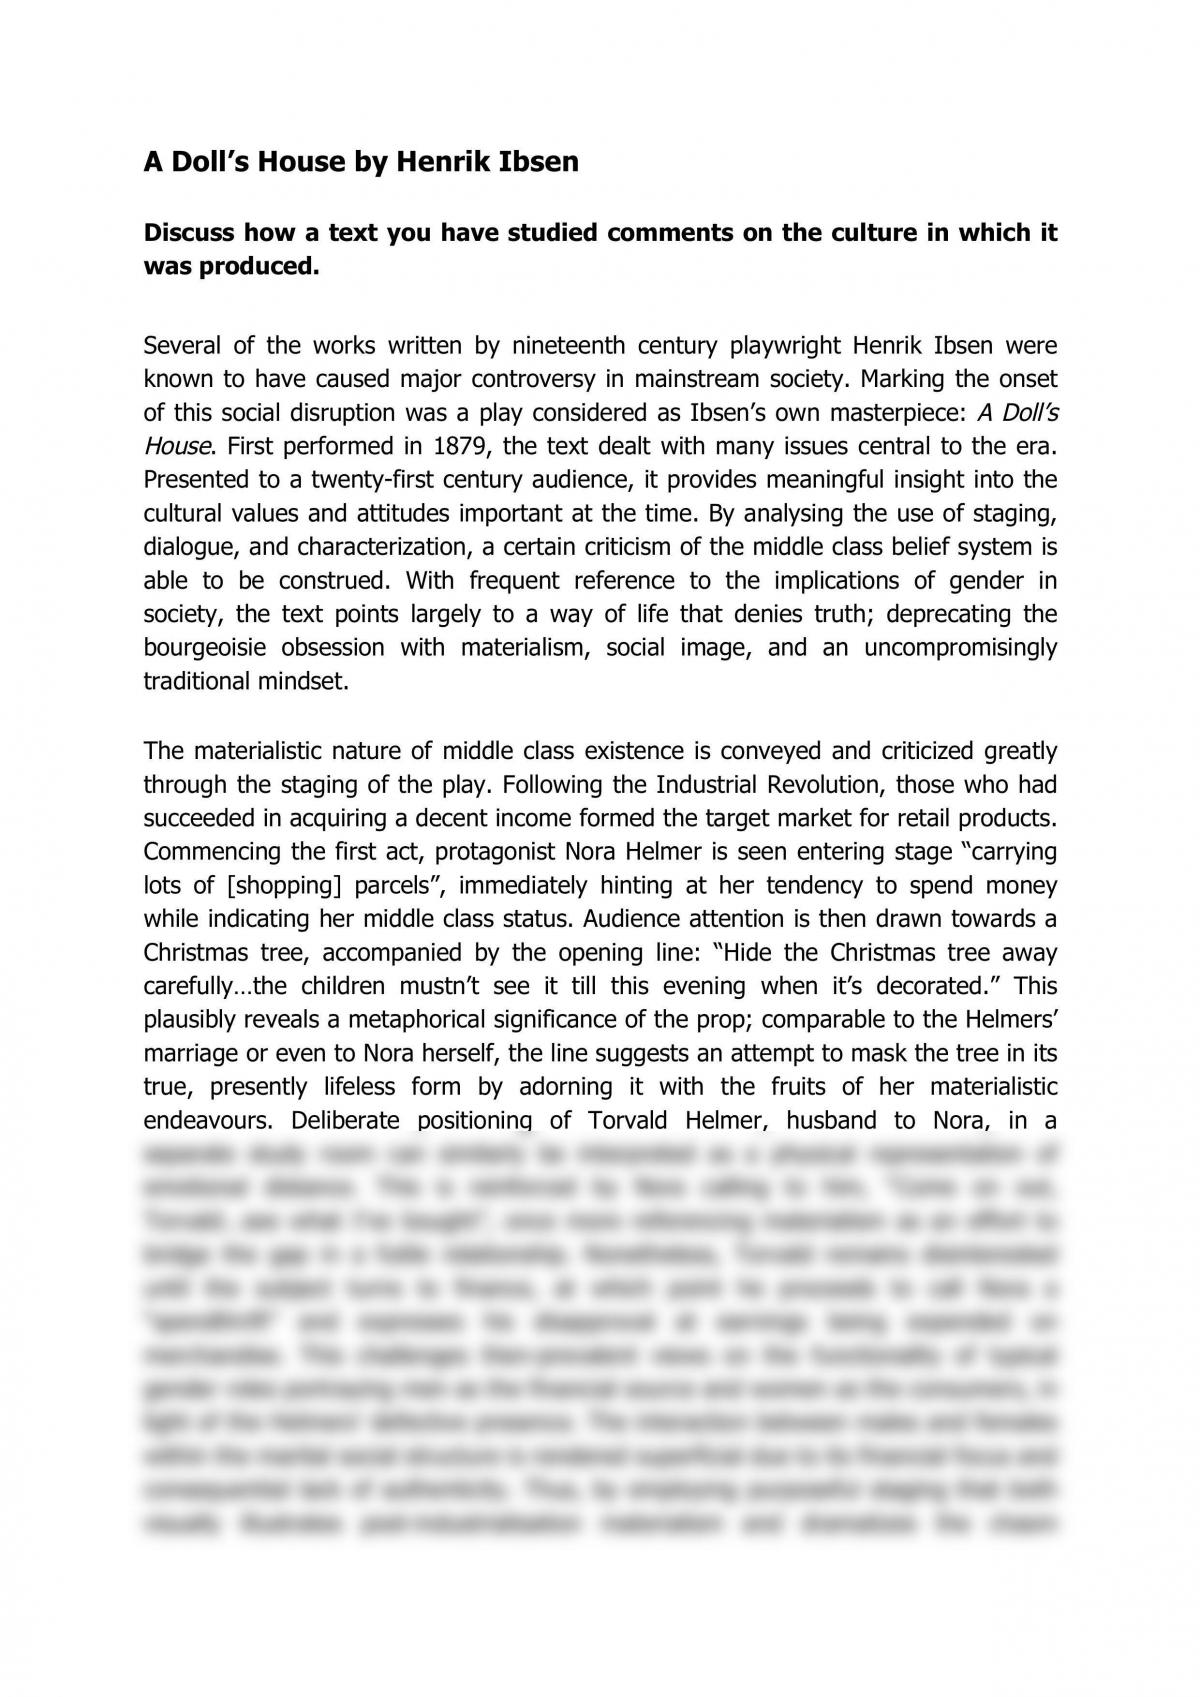 a doll's house research paper